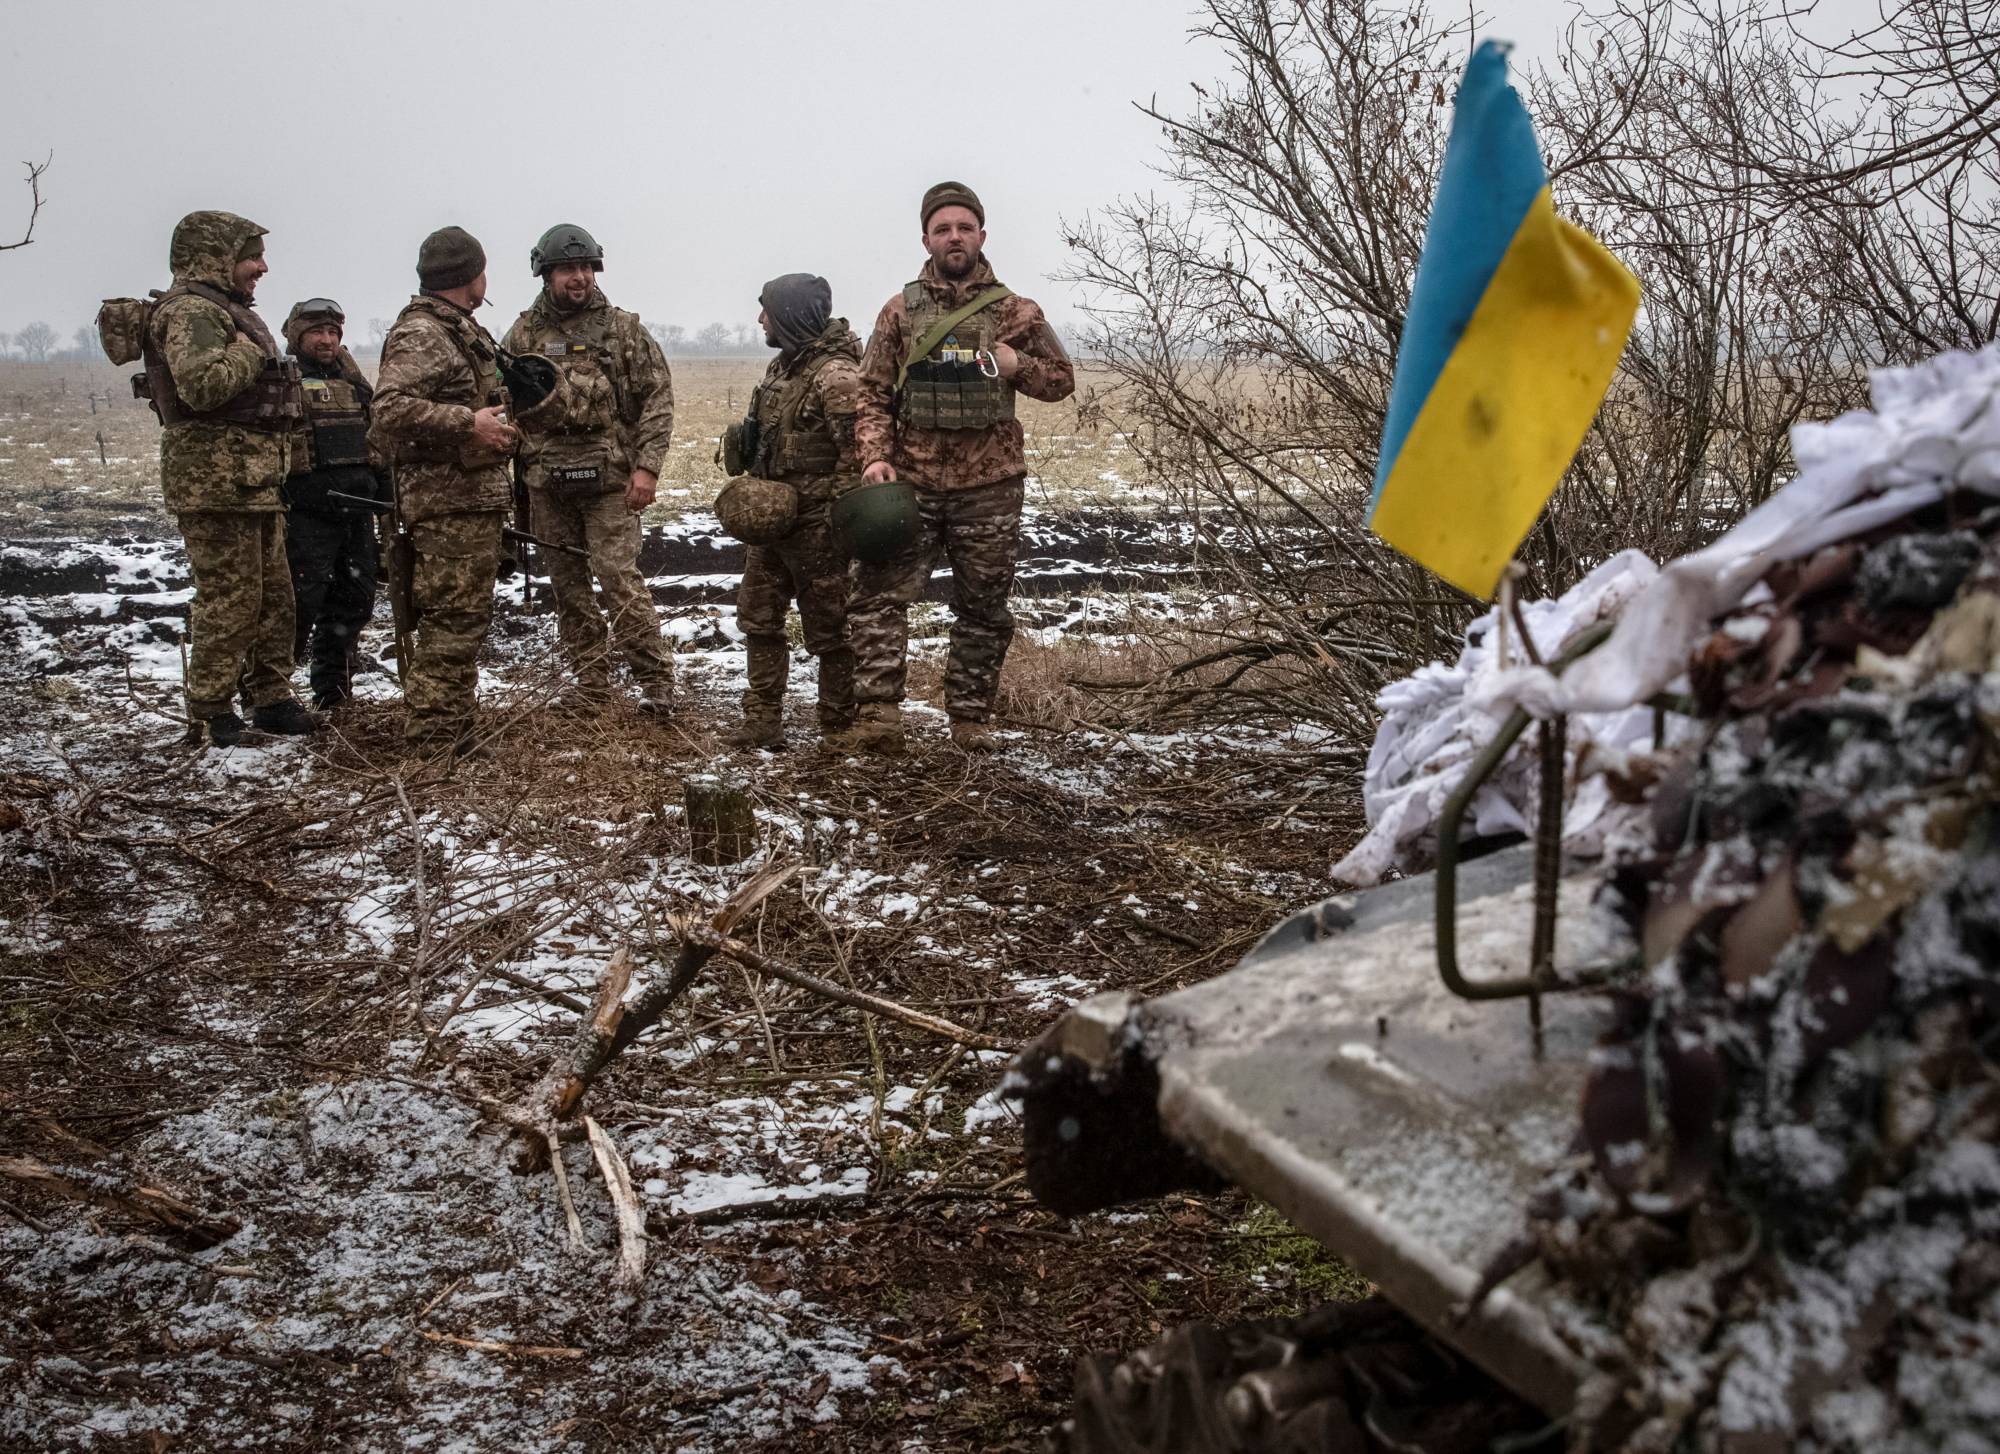 Ukrainian servicemen stand at their positions near a front line in the Donetsk region of Ukraine on Wednesday. | REUTERS